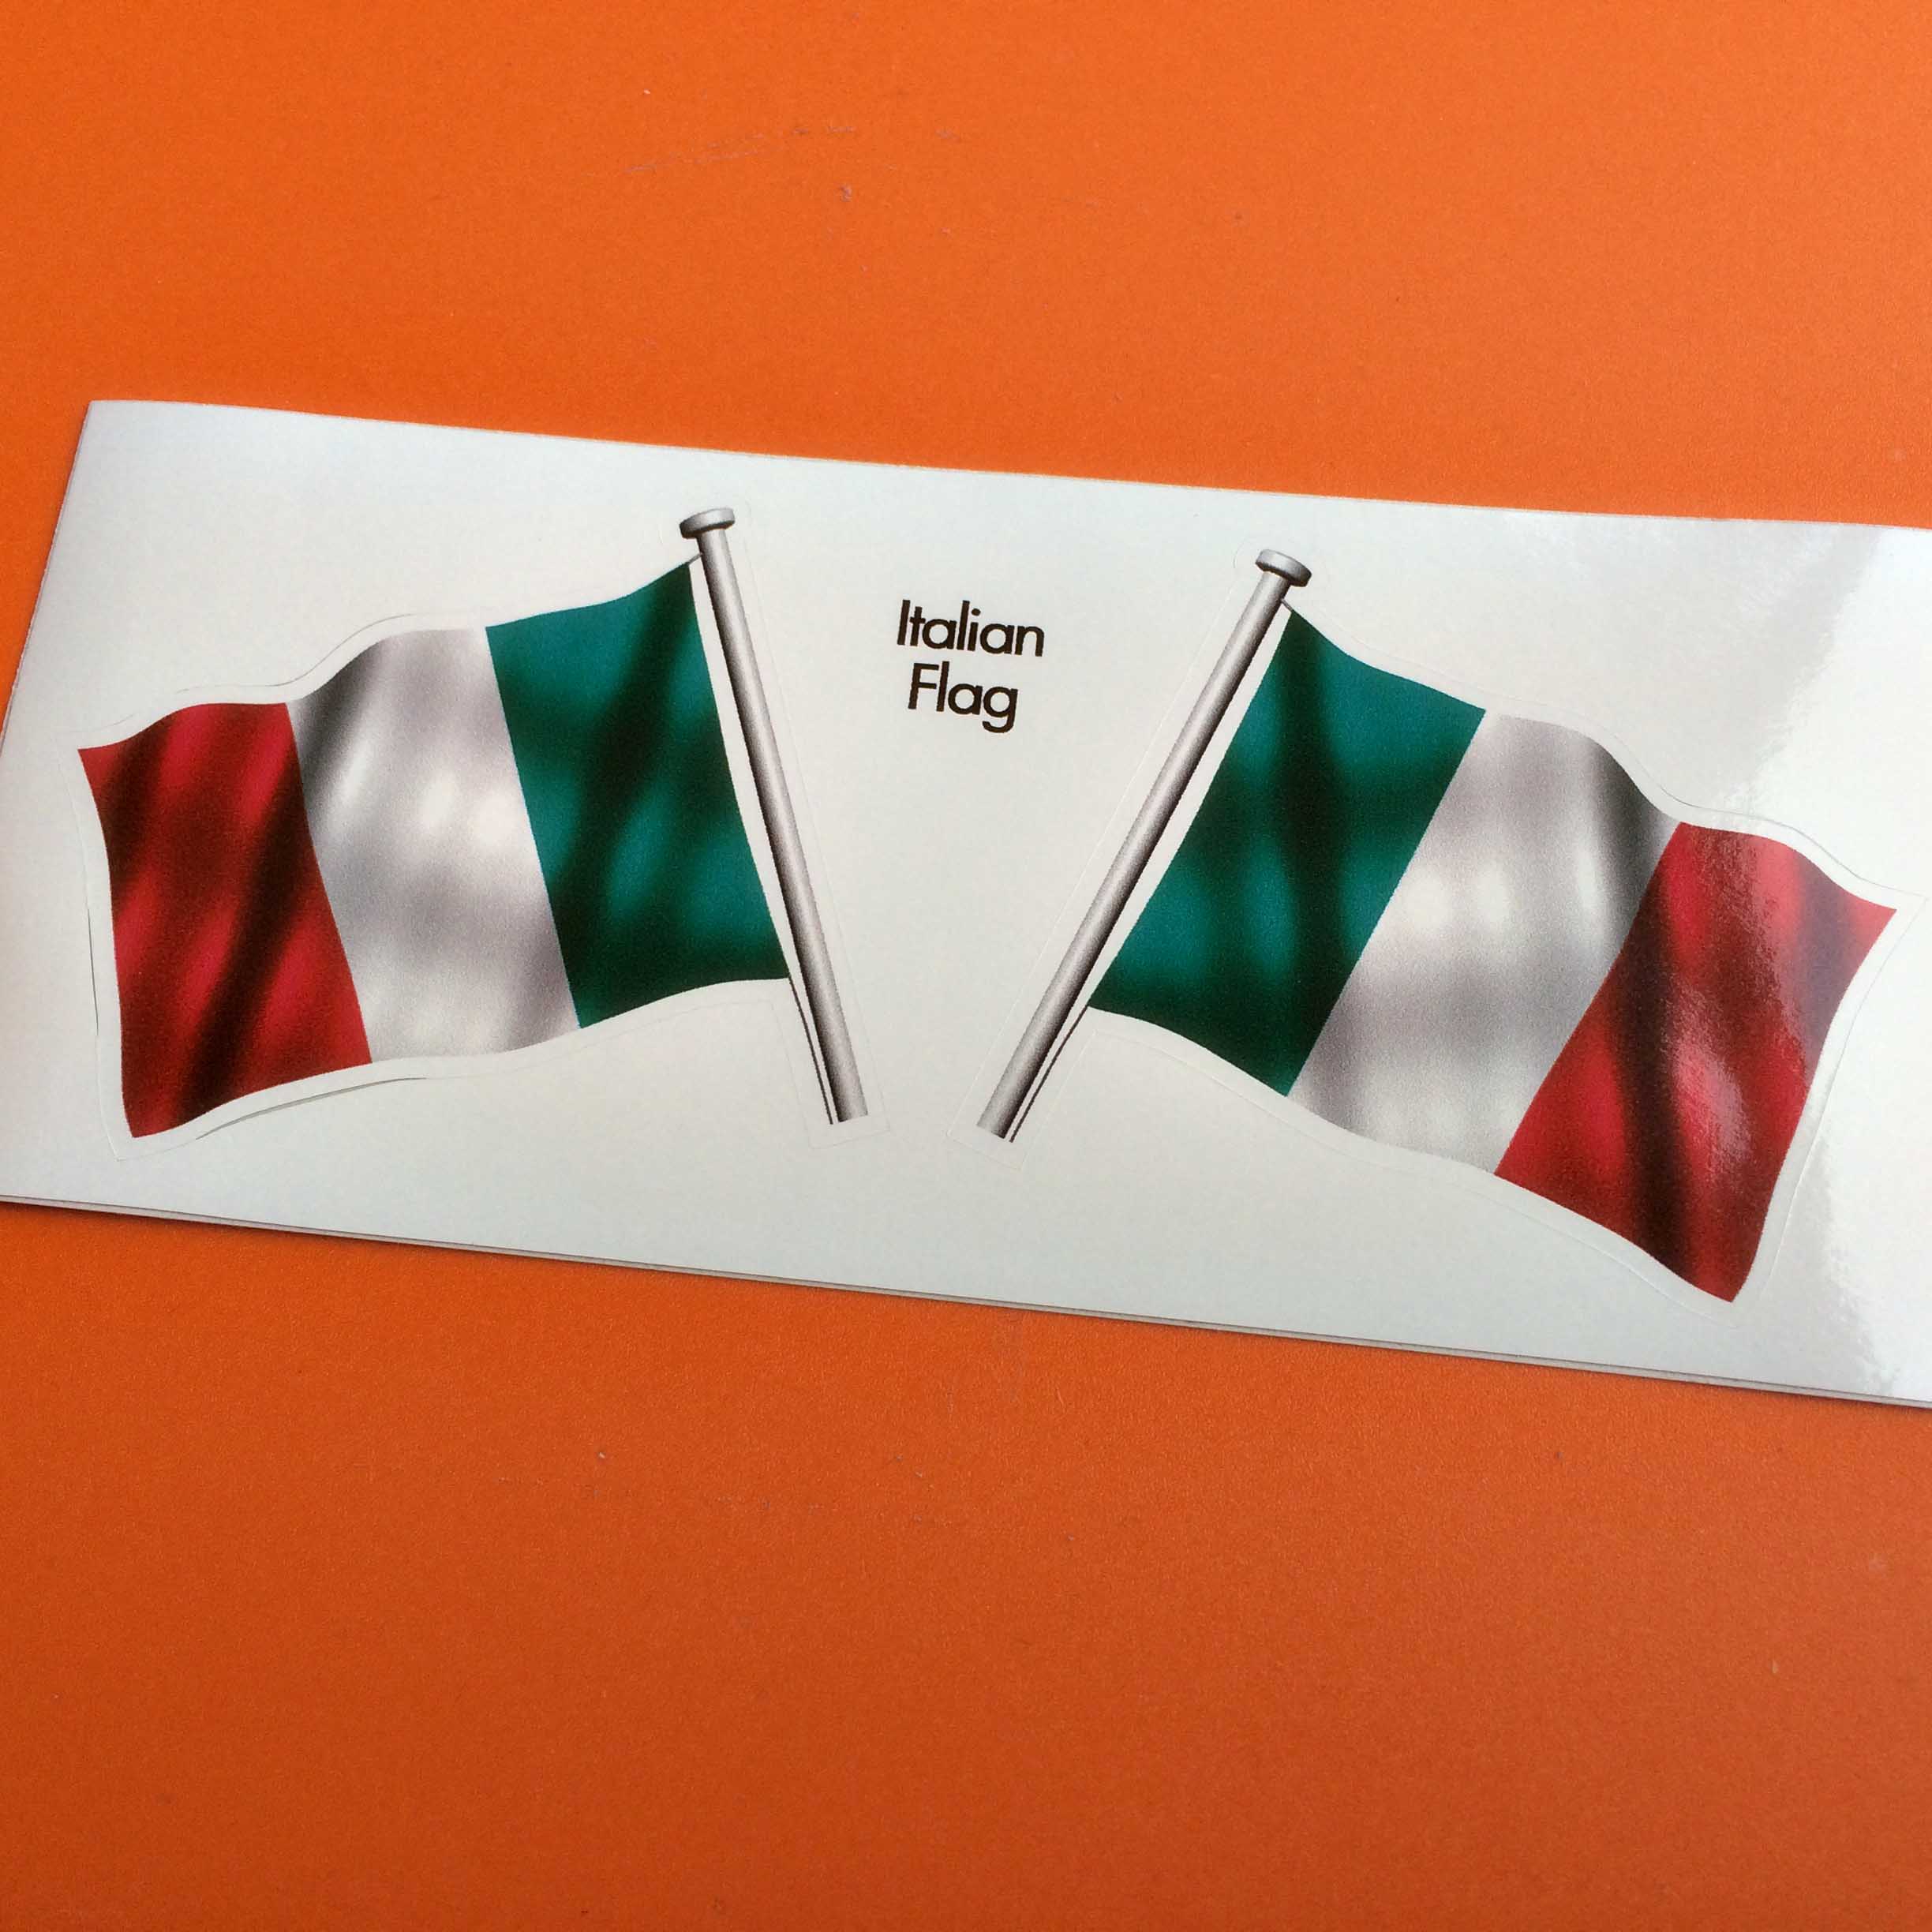 ITALY/ITALIAN FLAG STICKERS. Three vertical columns of green, white and red. The national colours of Italy.